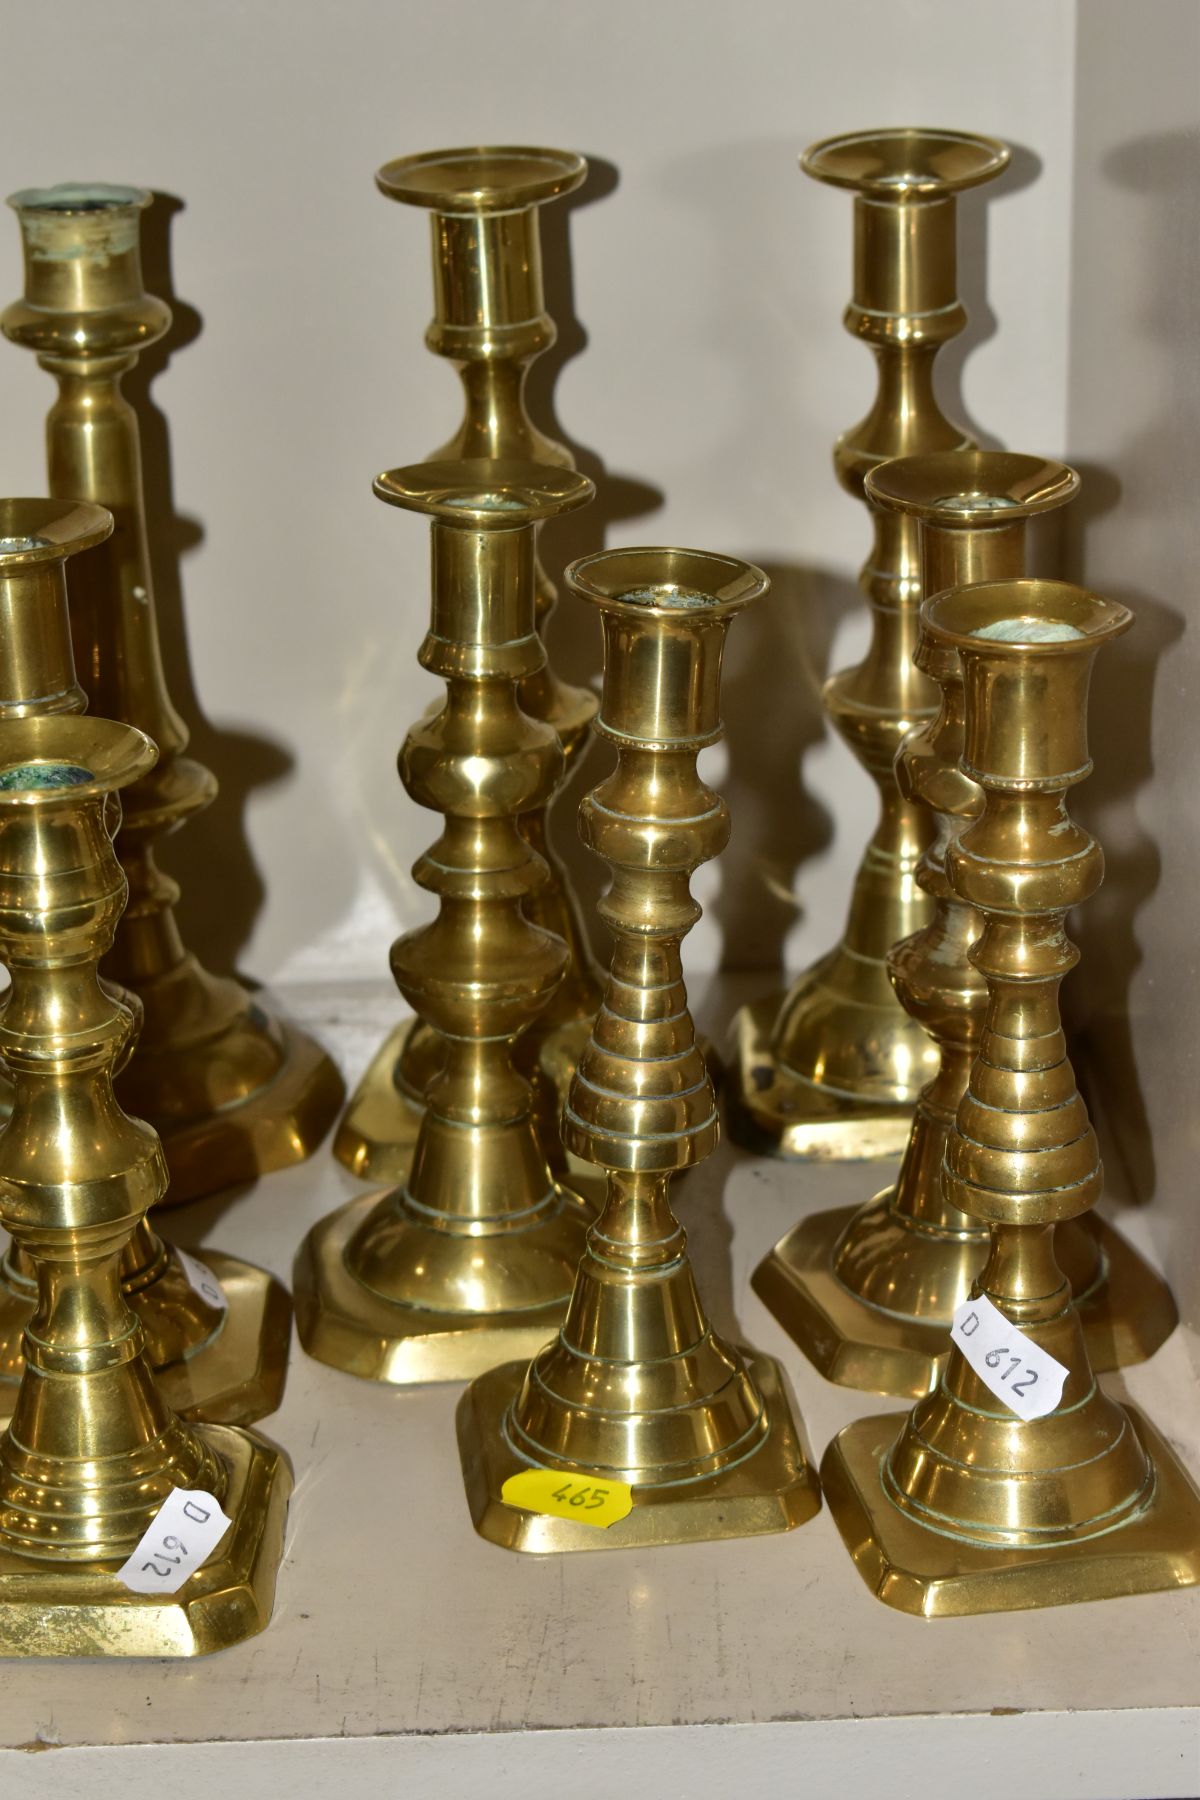 SIX PAIRS OF BRASS CANDLESTICKS, tallest height 22cm and smallest height 16cm, all fitted with - Image 3 of 5